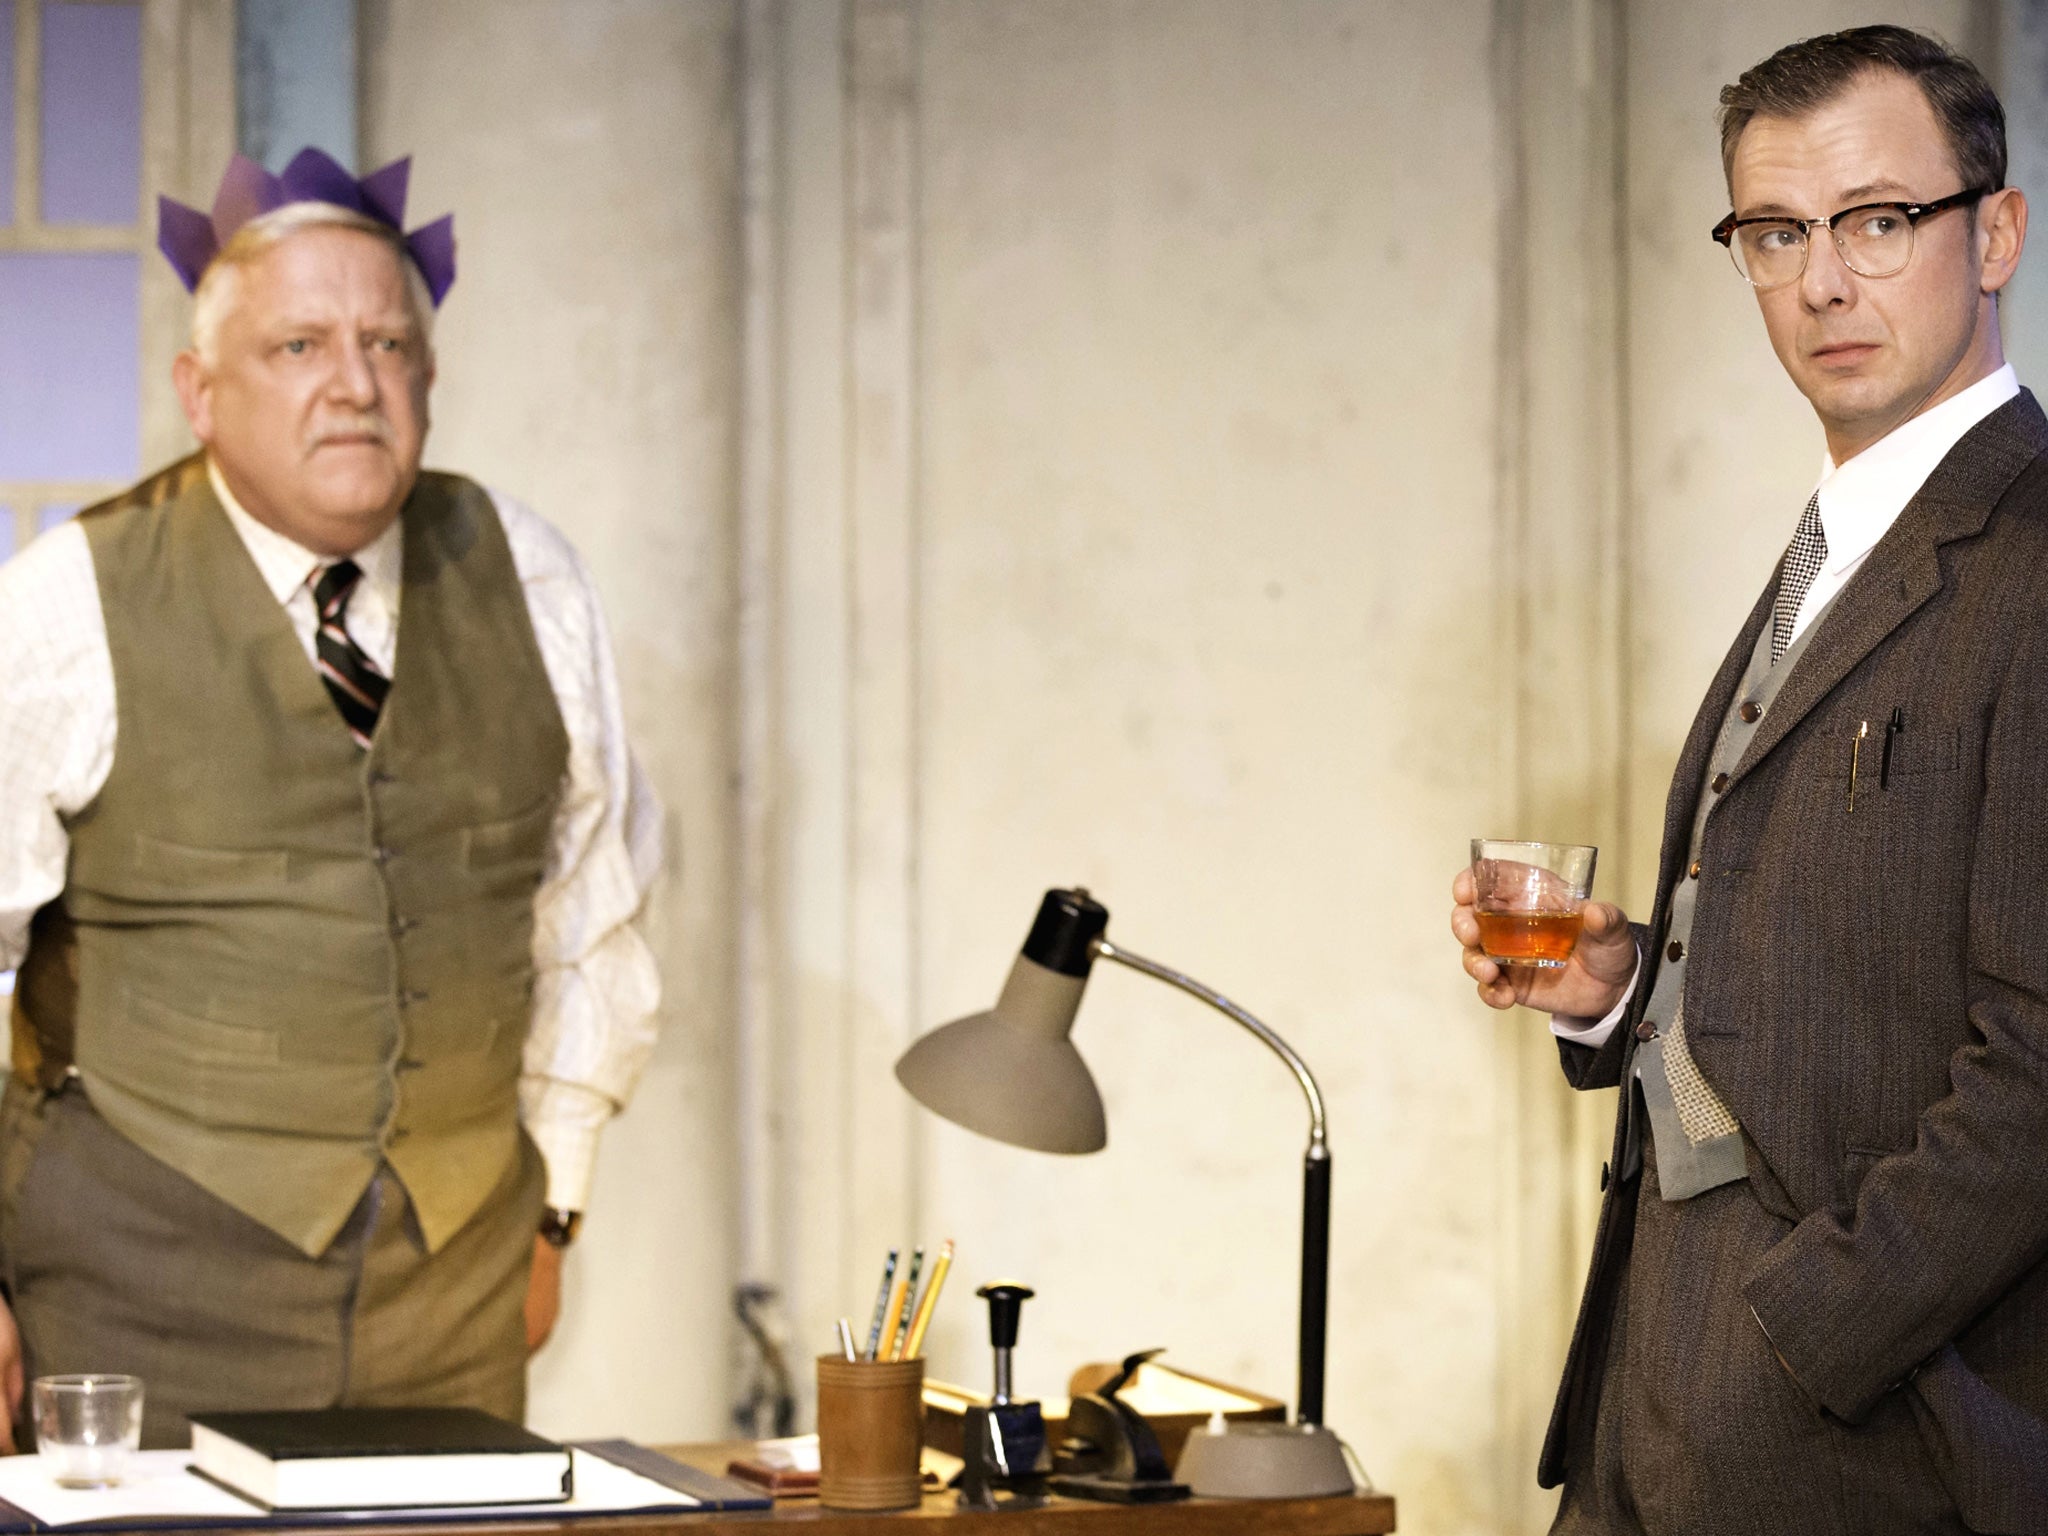 Staring role: Simon Russell Beale and John Simm in 'The Hothouse'